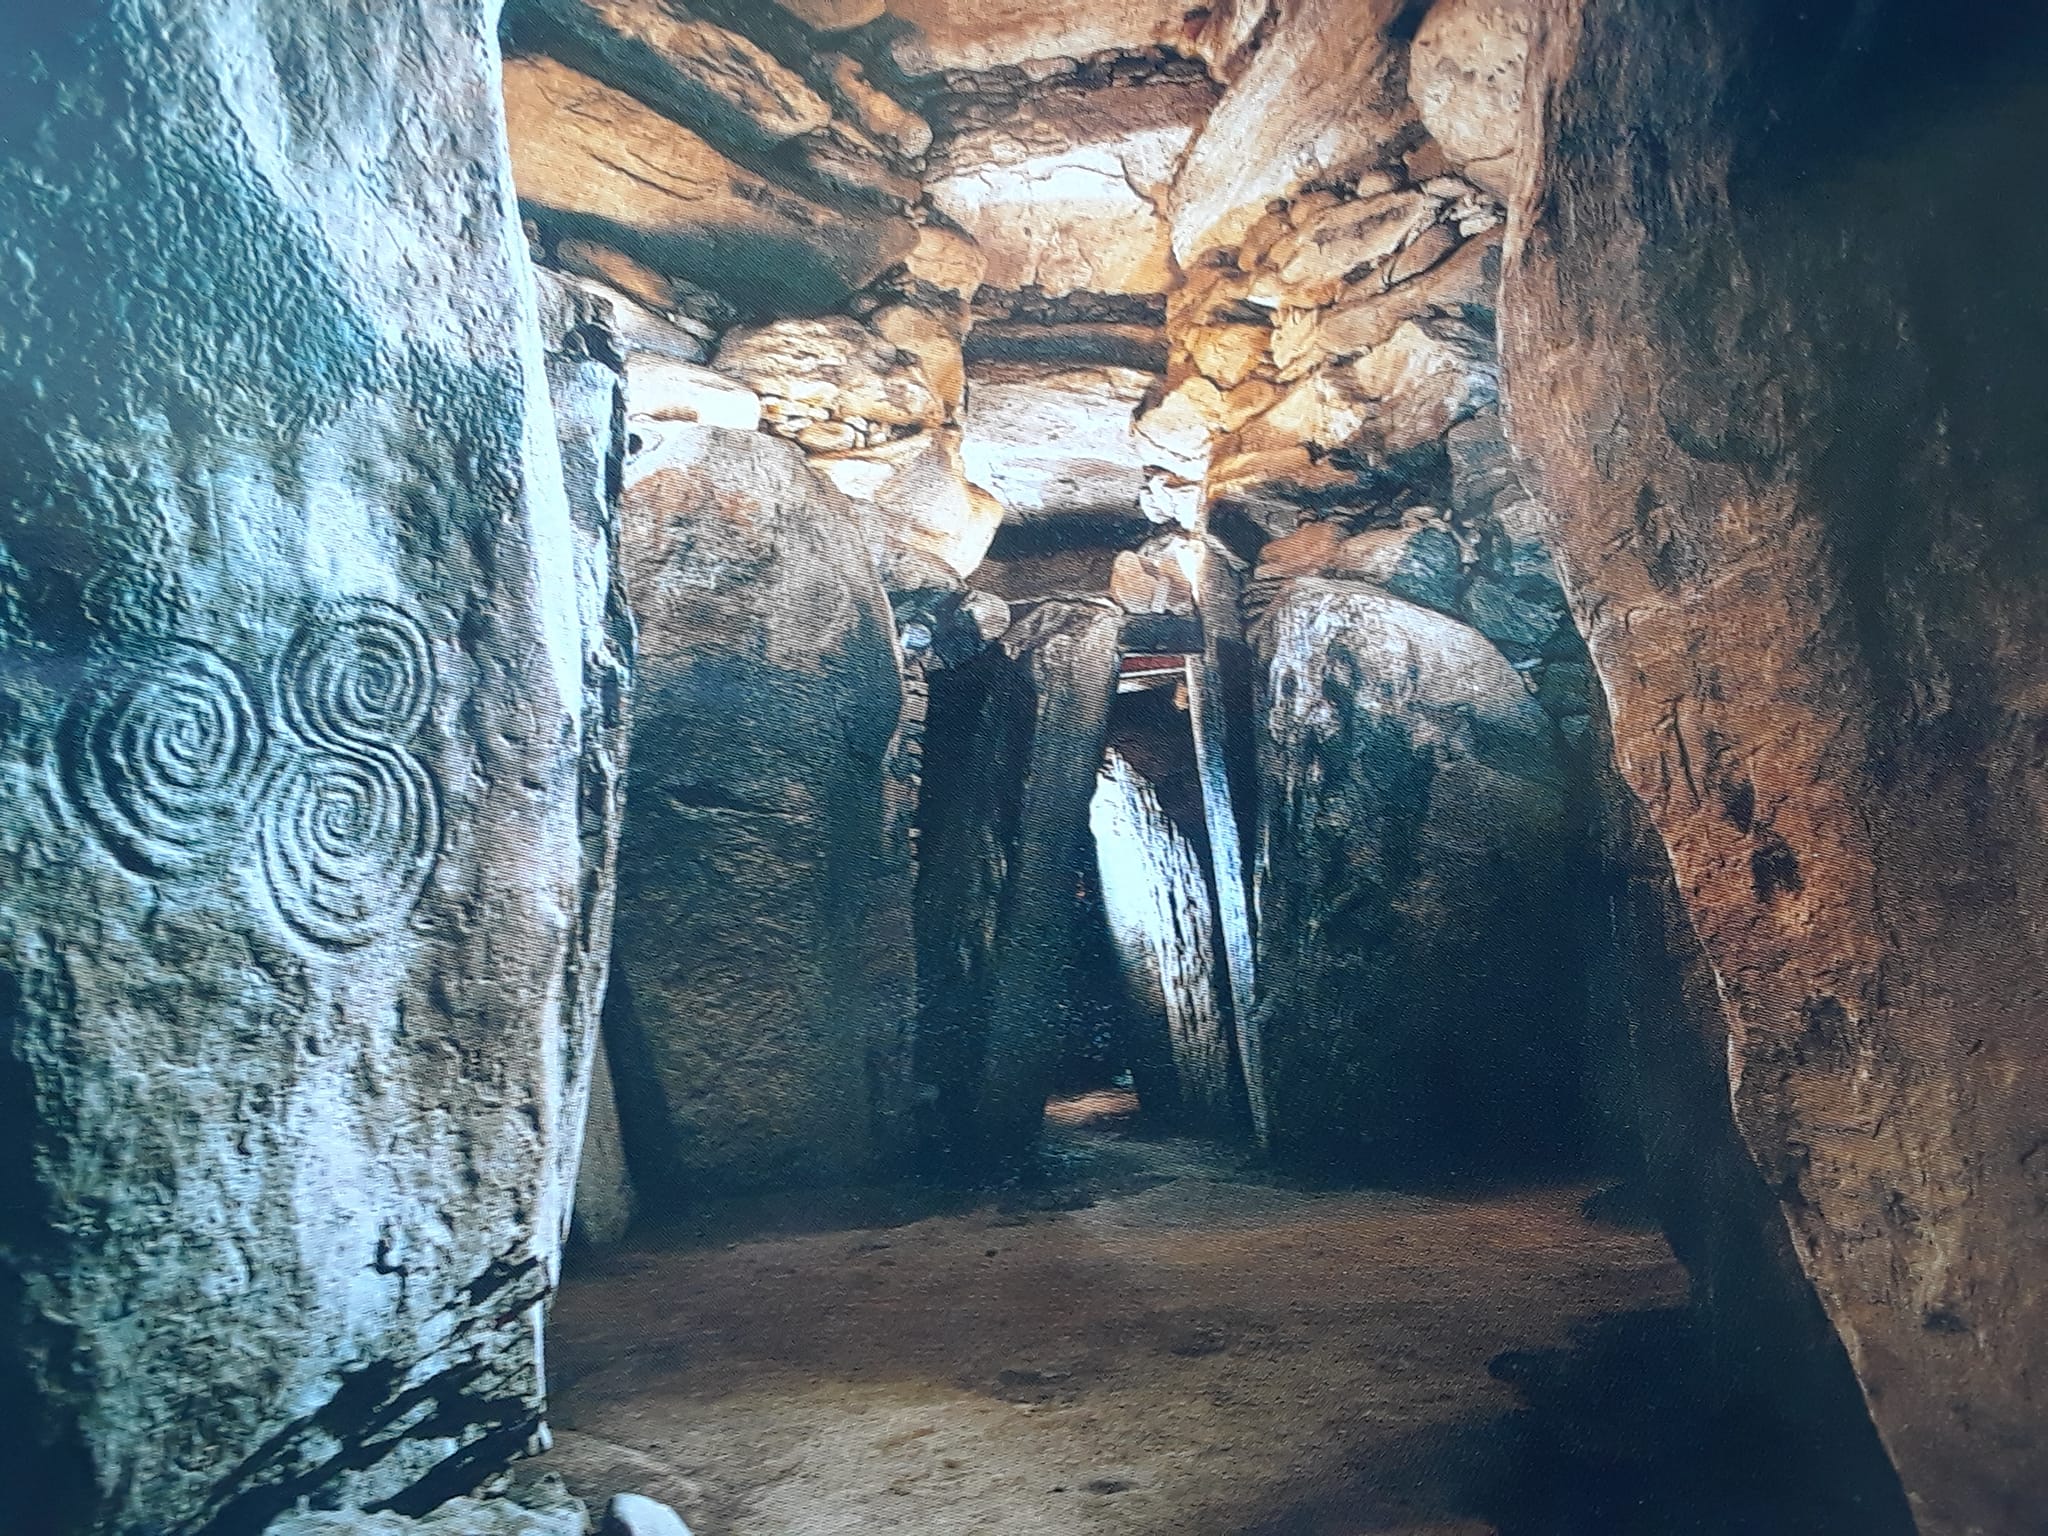 Illuminated cave with spirals carved onto the walls